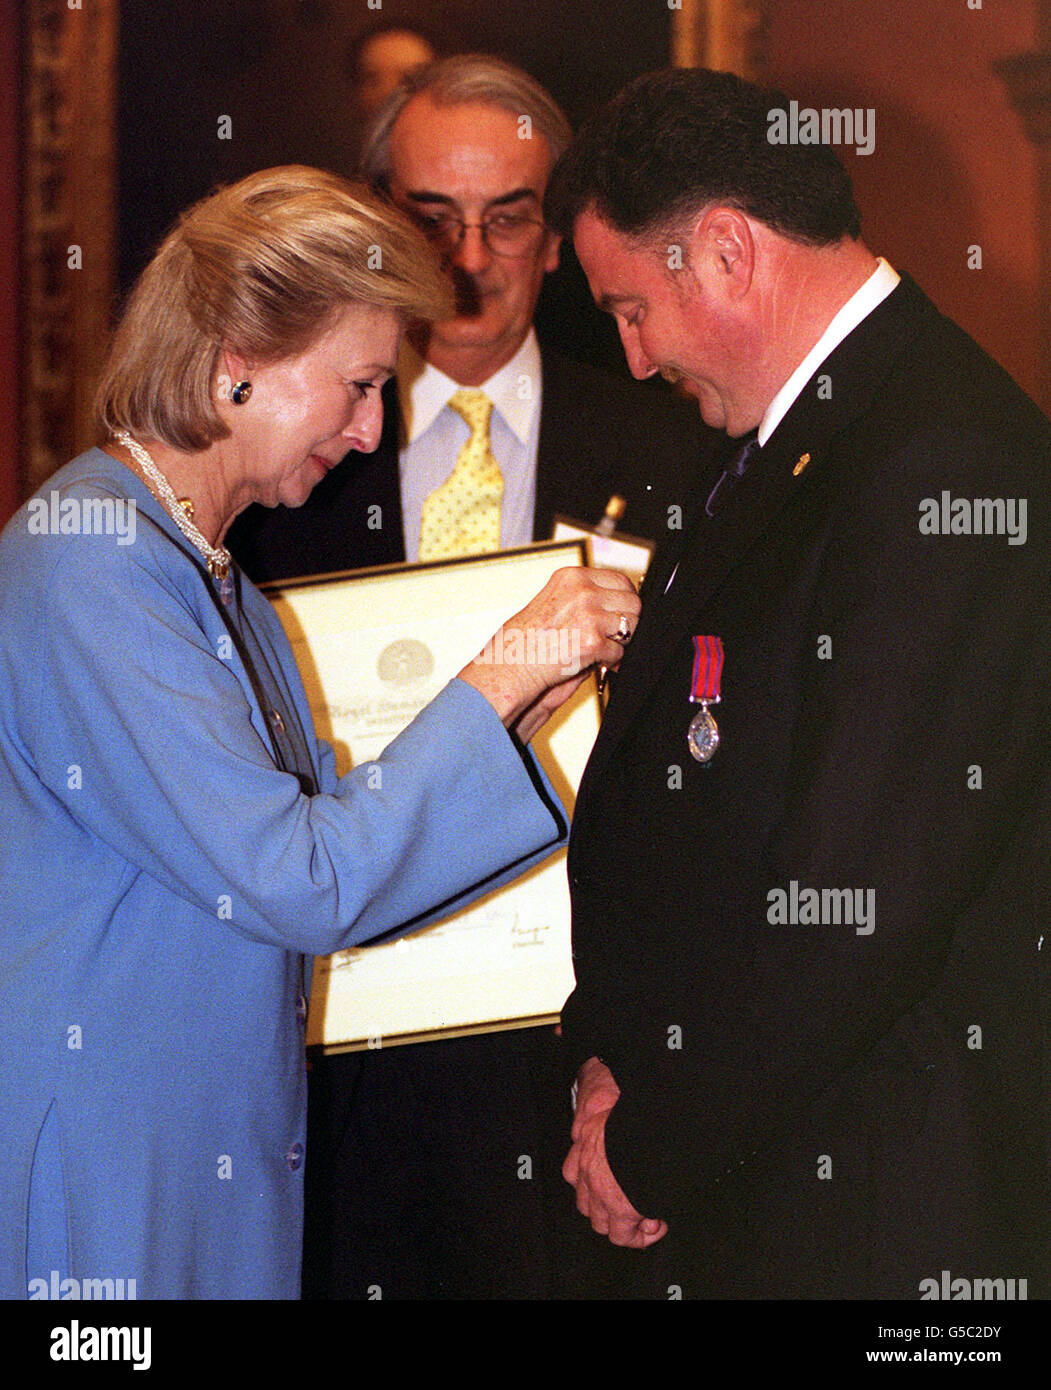 HRH Princess Alexandra, President of the Royal Humane Society, presents the Society's Stanhope Gold Medal 2000, to David Calnan, from Yukon, Canada, at a ceremony in London. * Mr Calnan, a landscape gardener, was awarded the medal for a supreme act of bravery in saving a young woman from attack by a grizzly bear. Stock Photo